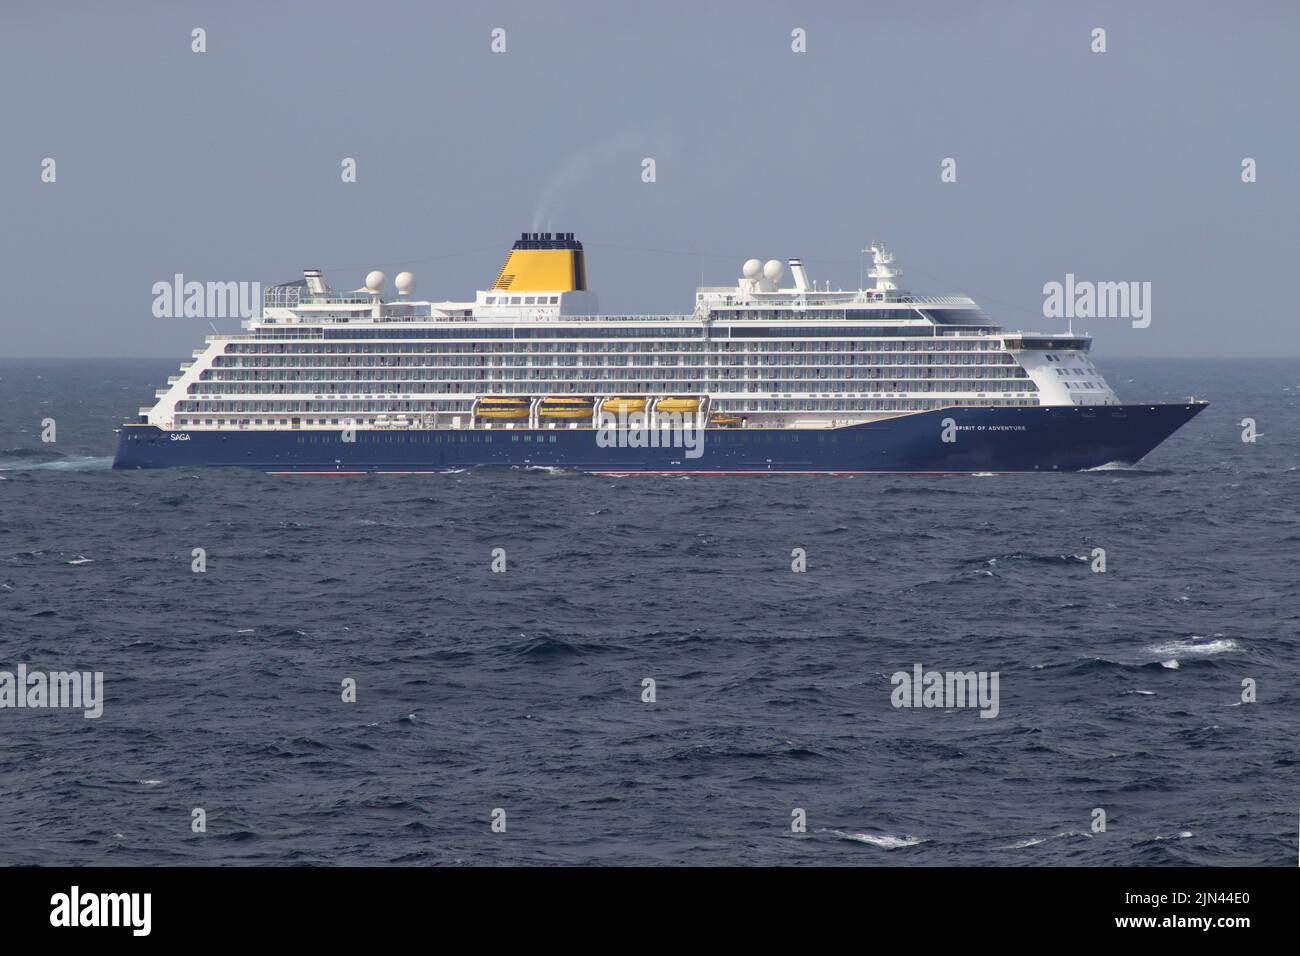 The Saga cruise ship Spirit of Adventure, 58,000 tons, photographed in the North Atlantic returning back to Southampton. Stock Photo